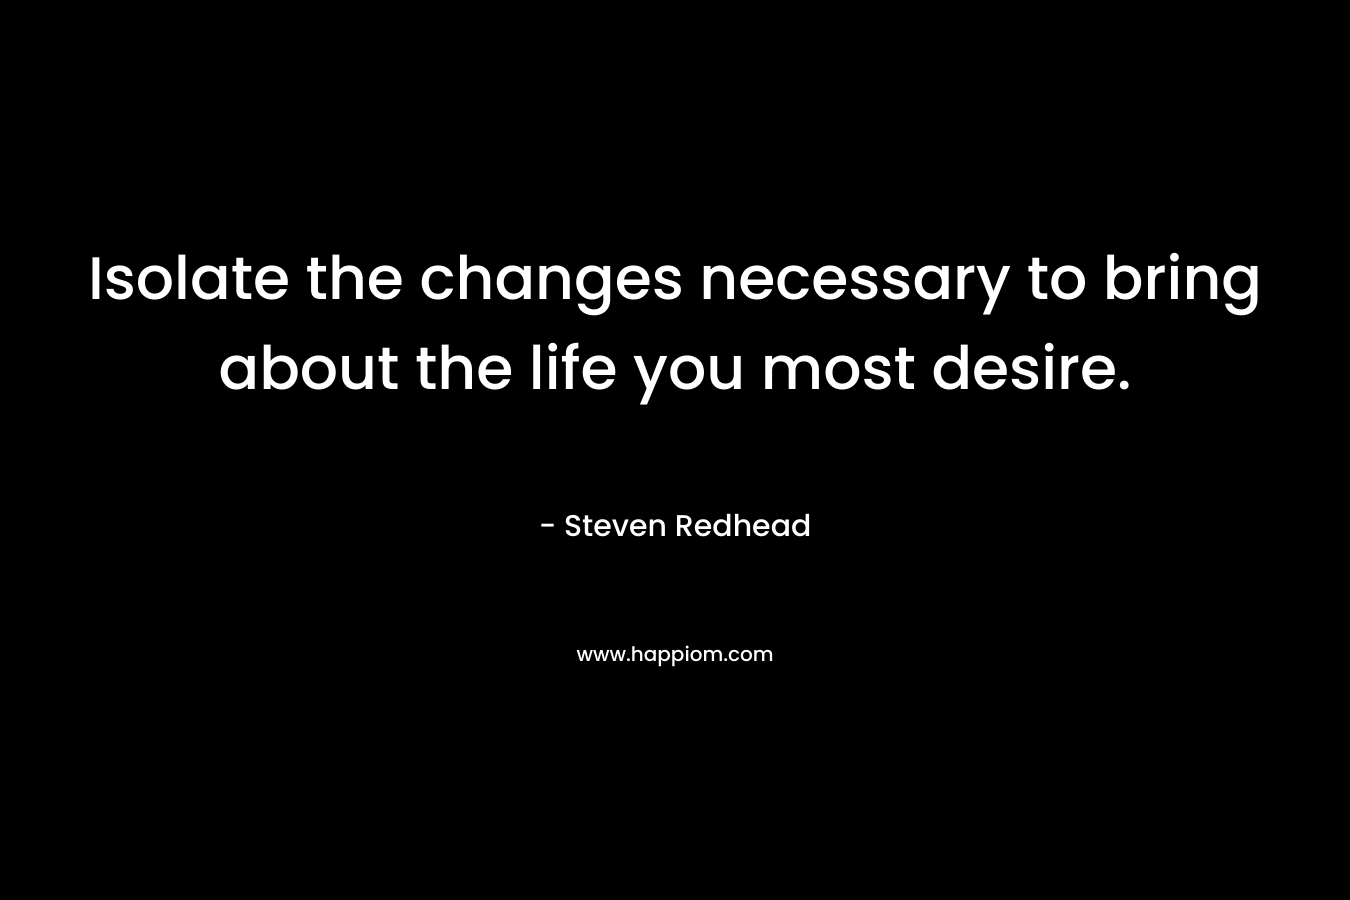 Isolate the changes necessary to bring about the life you most desire. – Steven Redhead